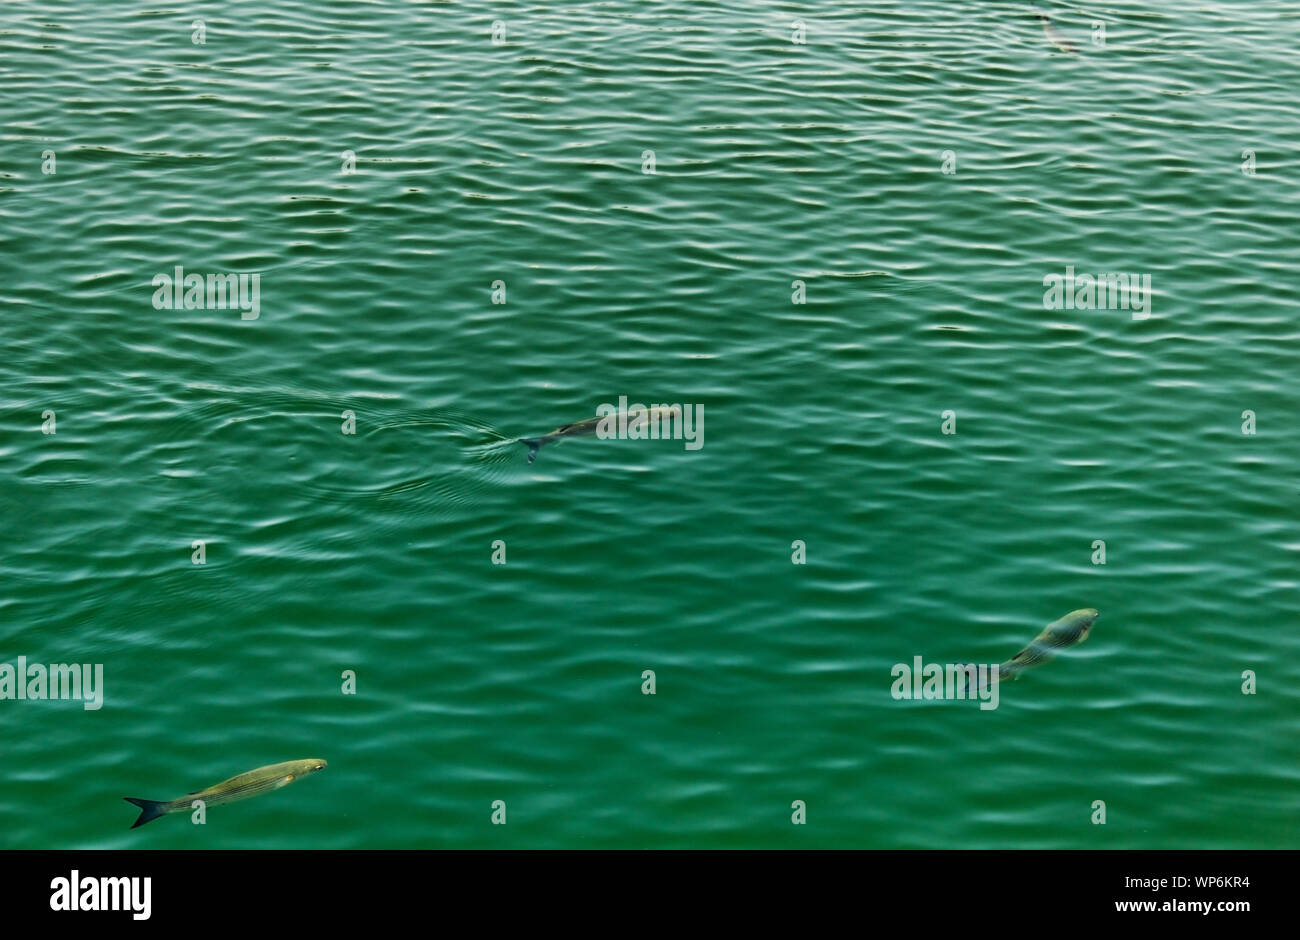 Three mullet fish swim on the surface of green sea water forming a triangle. Stock Photo